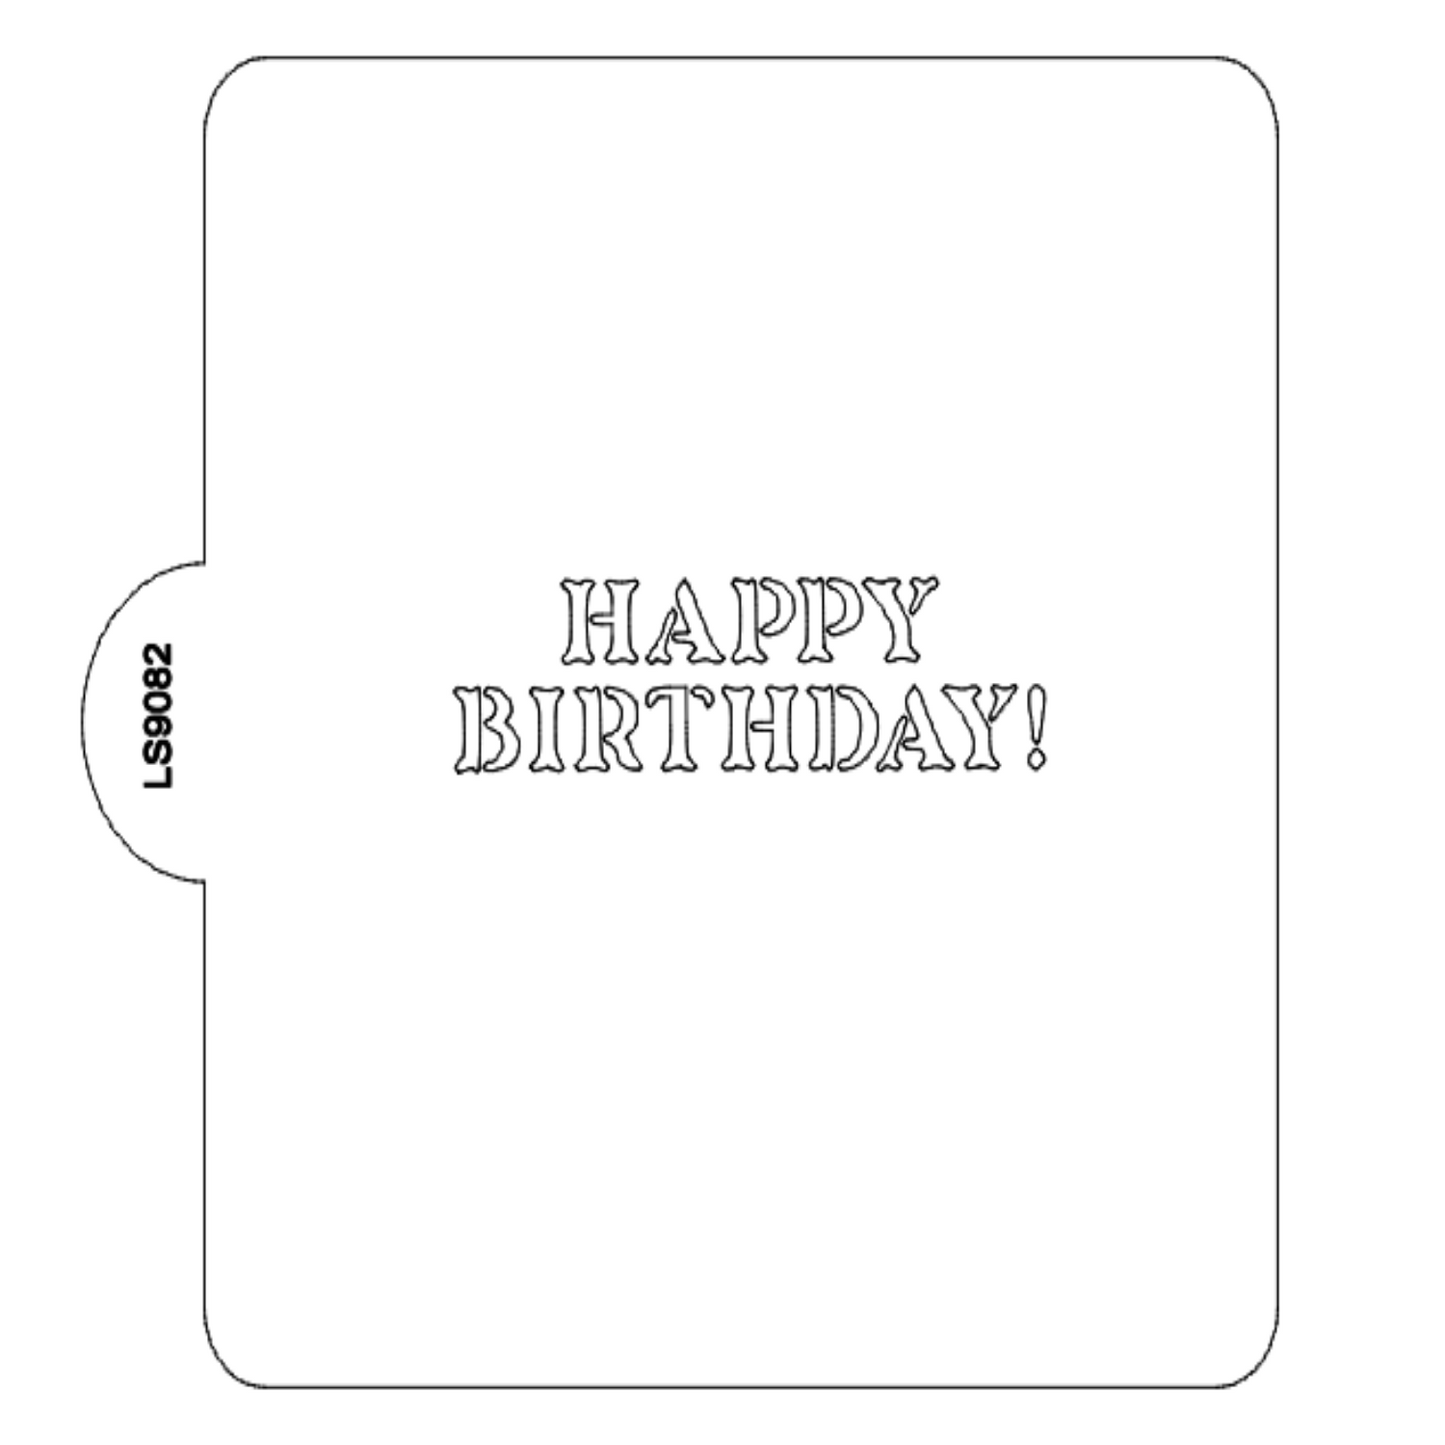 Happy Birthday Block Font Stencil for Cookies or Cakes USA Made LS9082